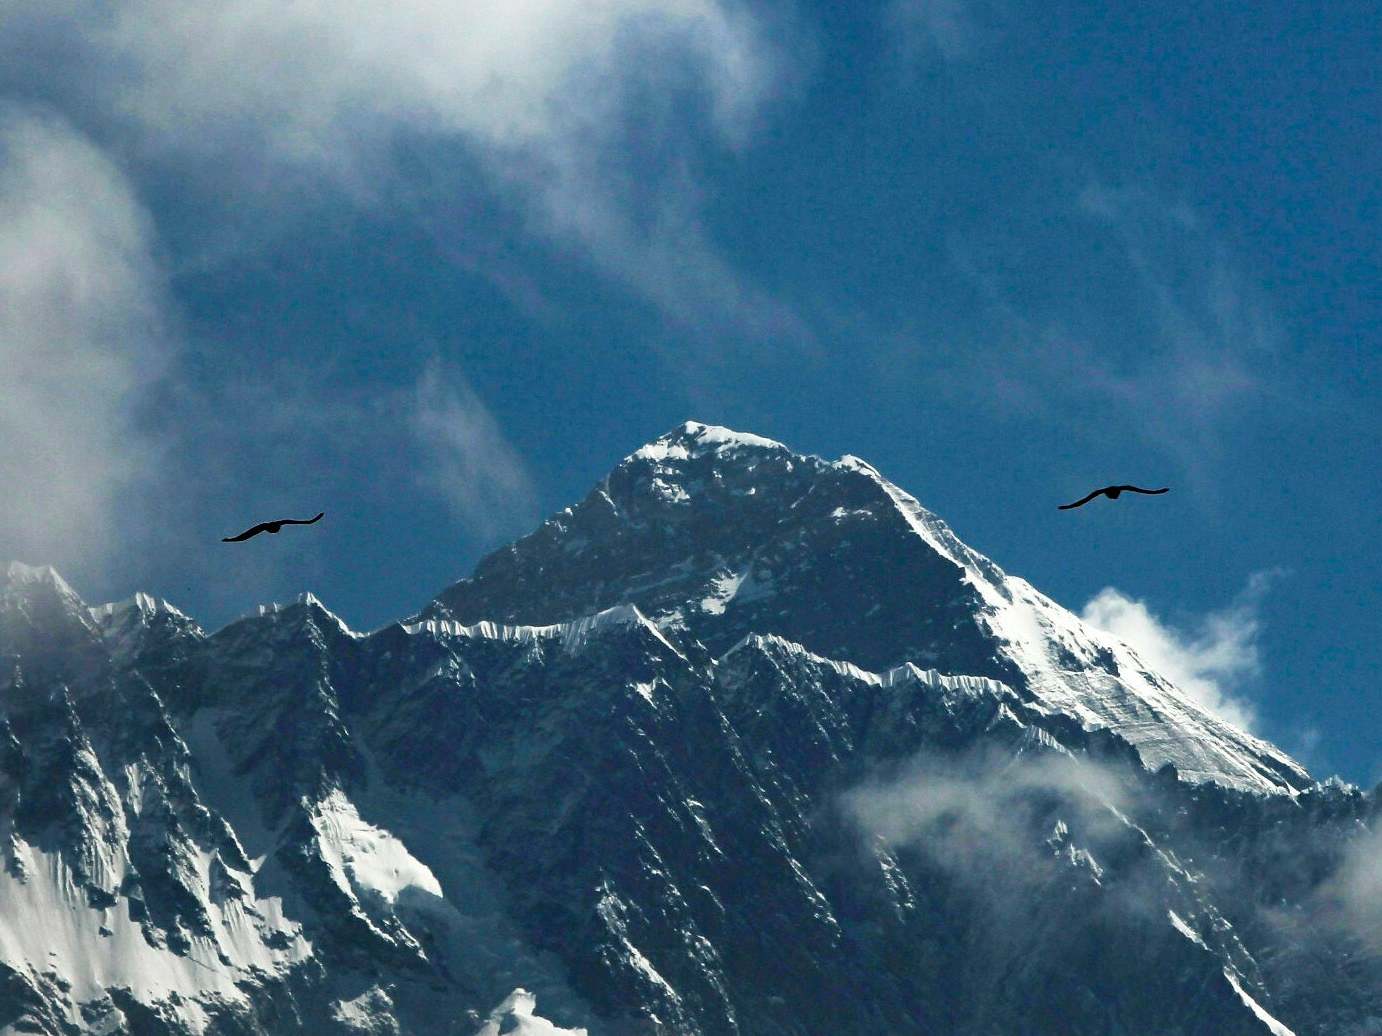 Mount Everest is seen from Namche Bajar, Solukhumbu district, Nepal